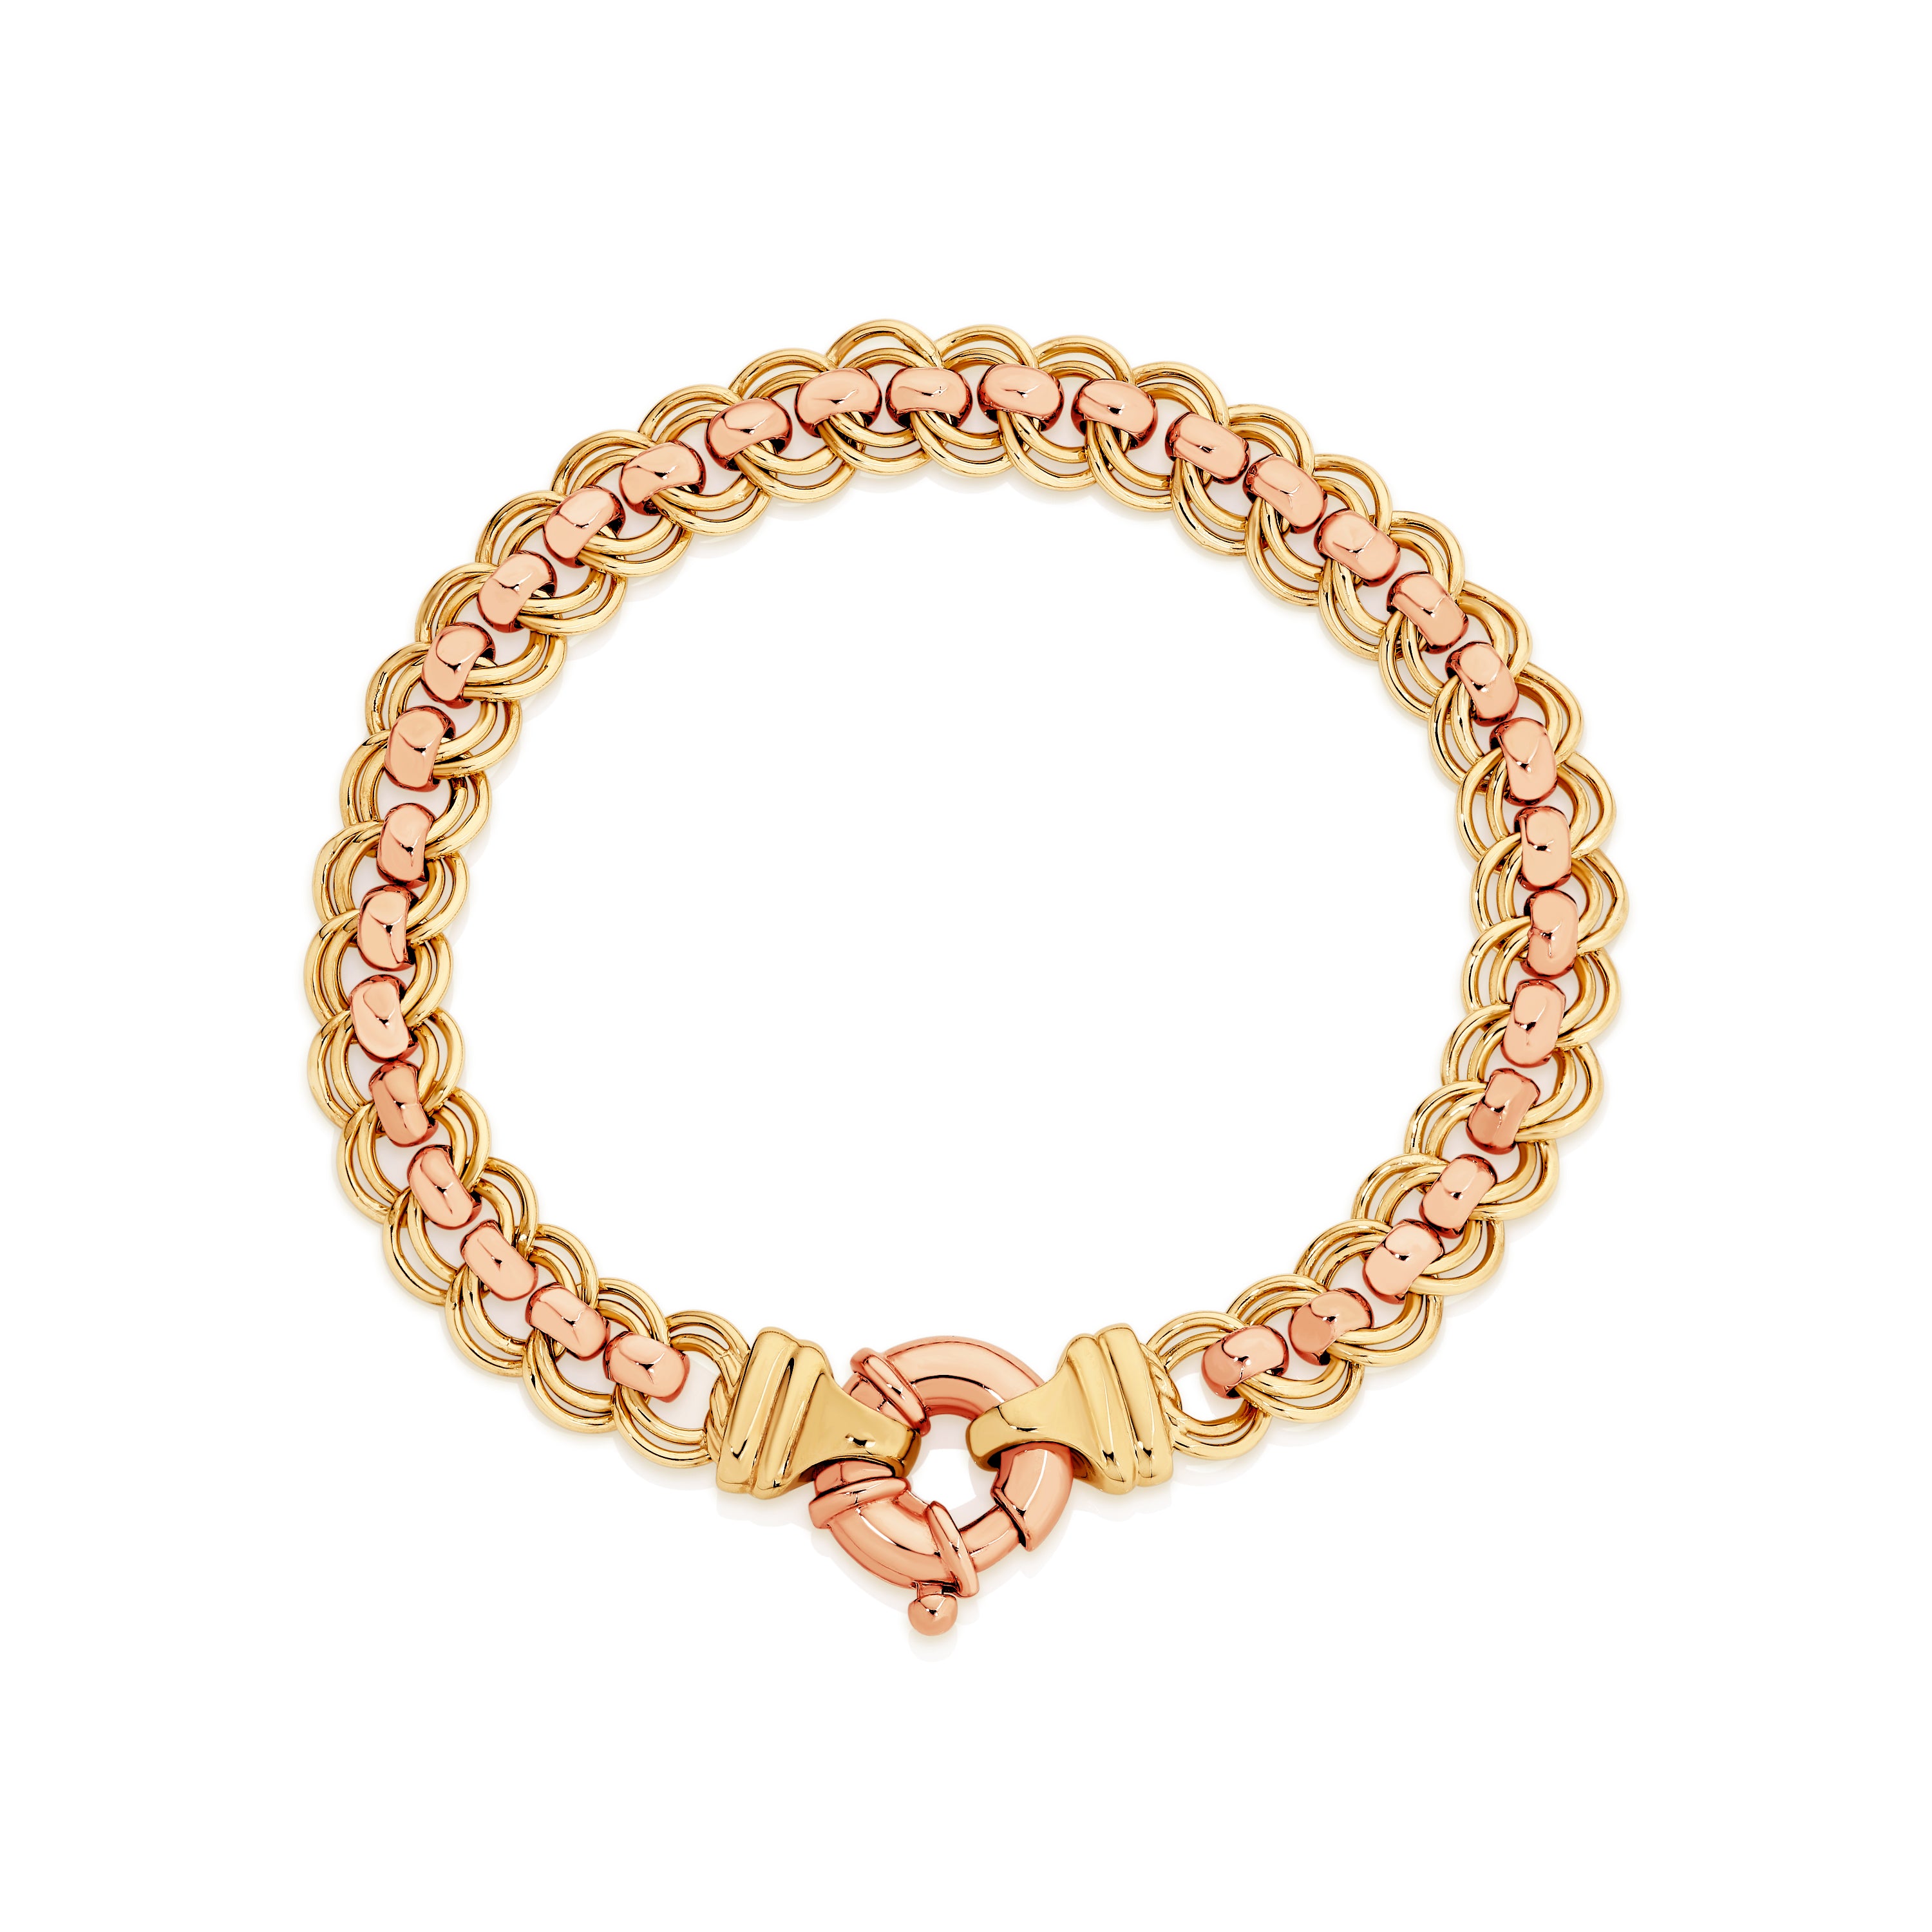 9ct yellow & rose gold solid roller bracelet